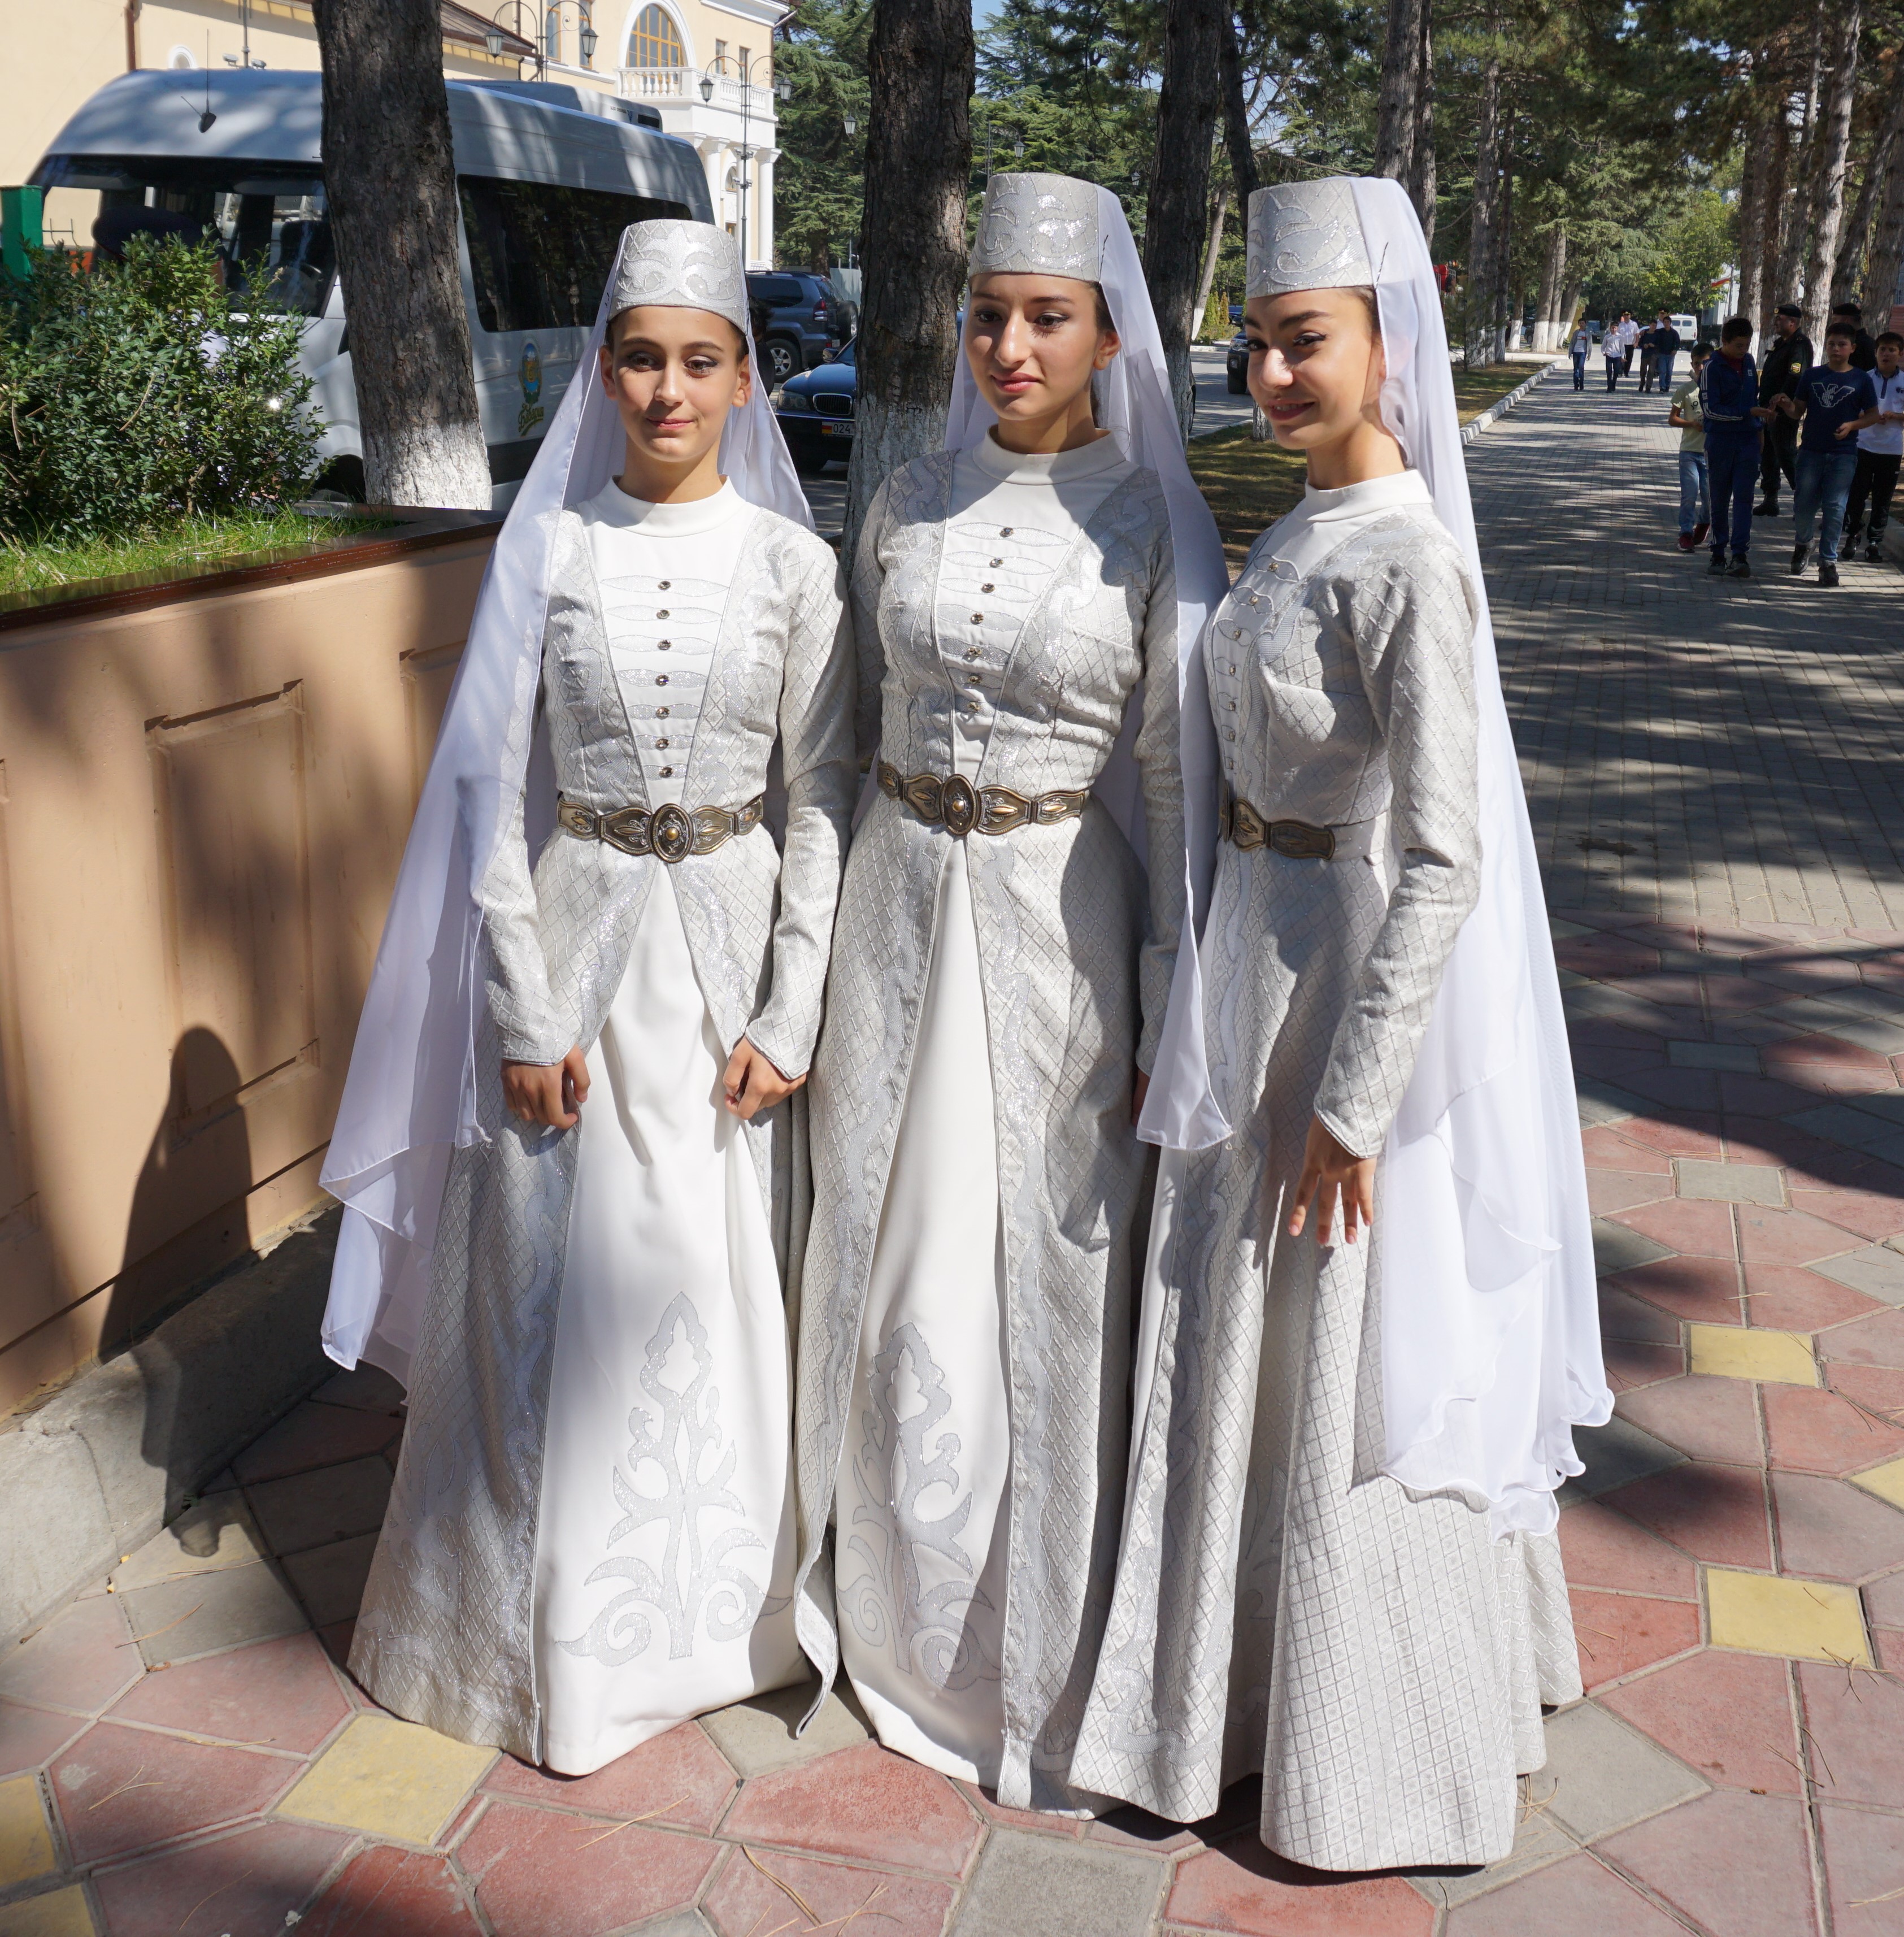 South Ossetian brides in full dress to attend the ceremonies